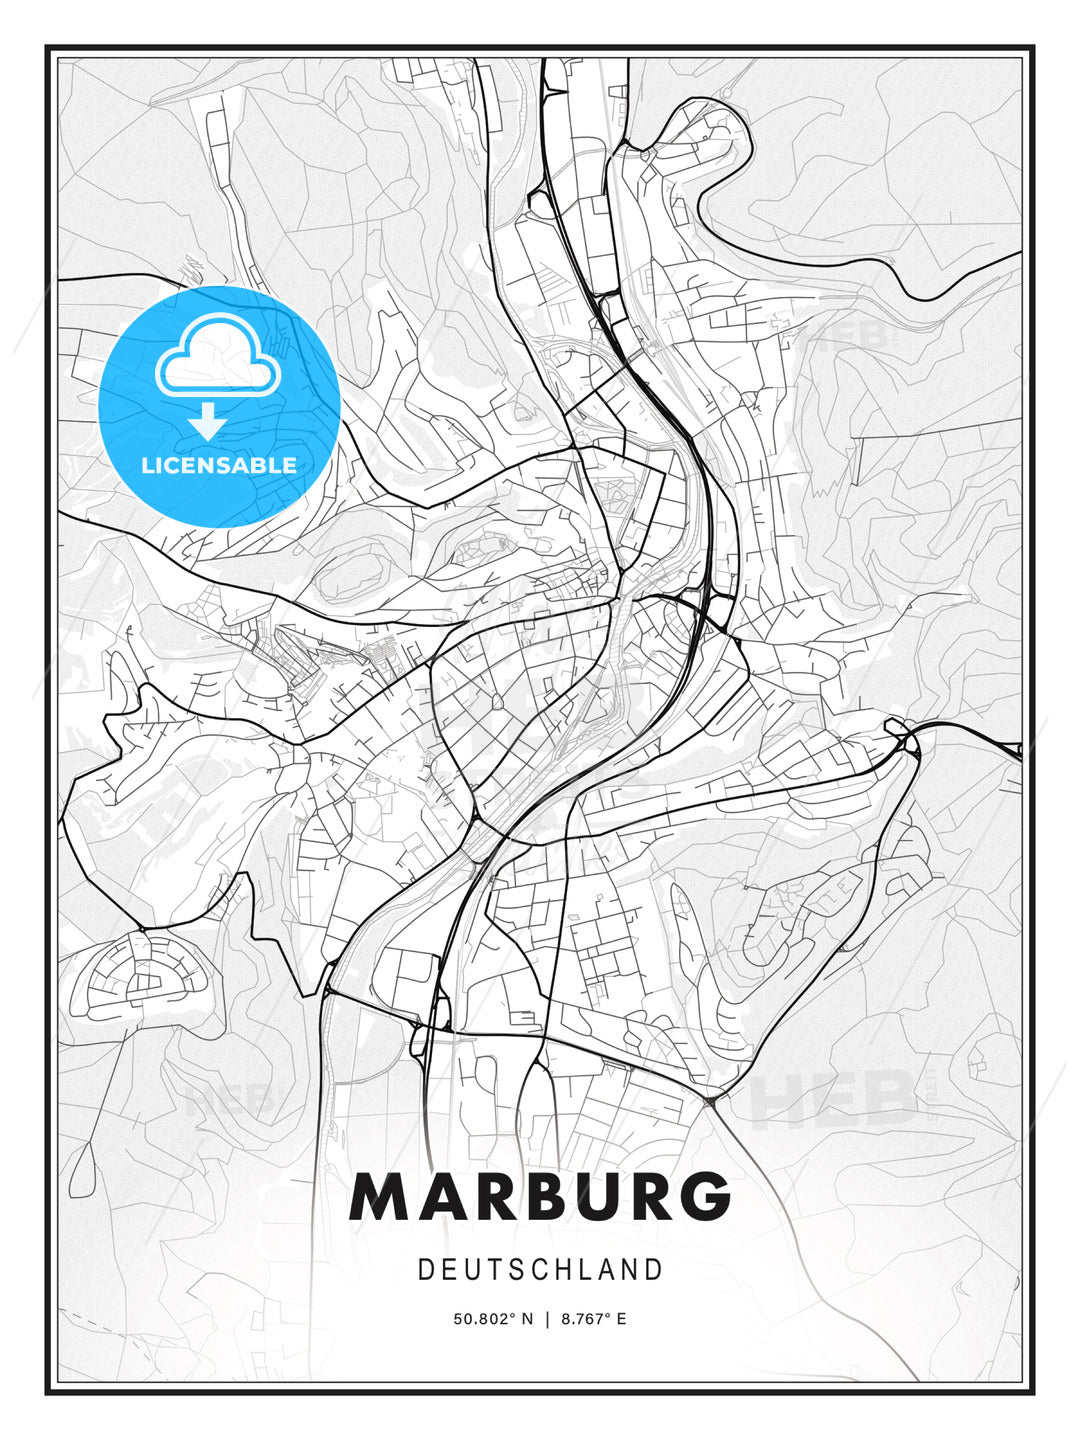 Marburg, Germany, Modern Print Template in Various Formats - HEBSTREITS Sketches